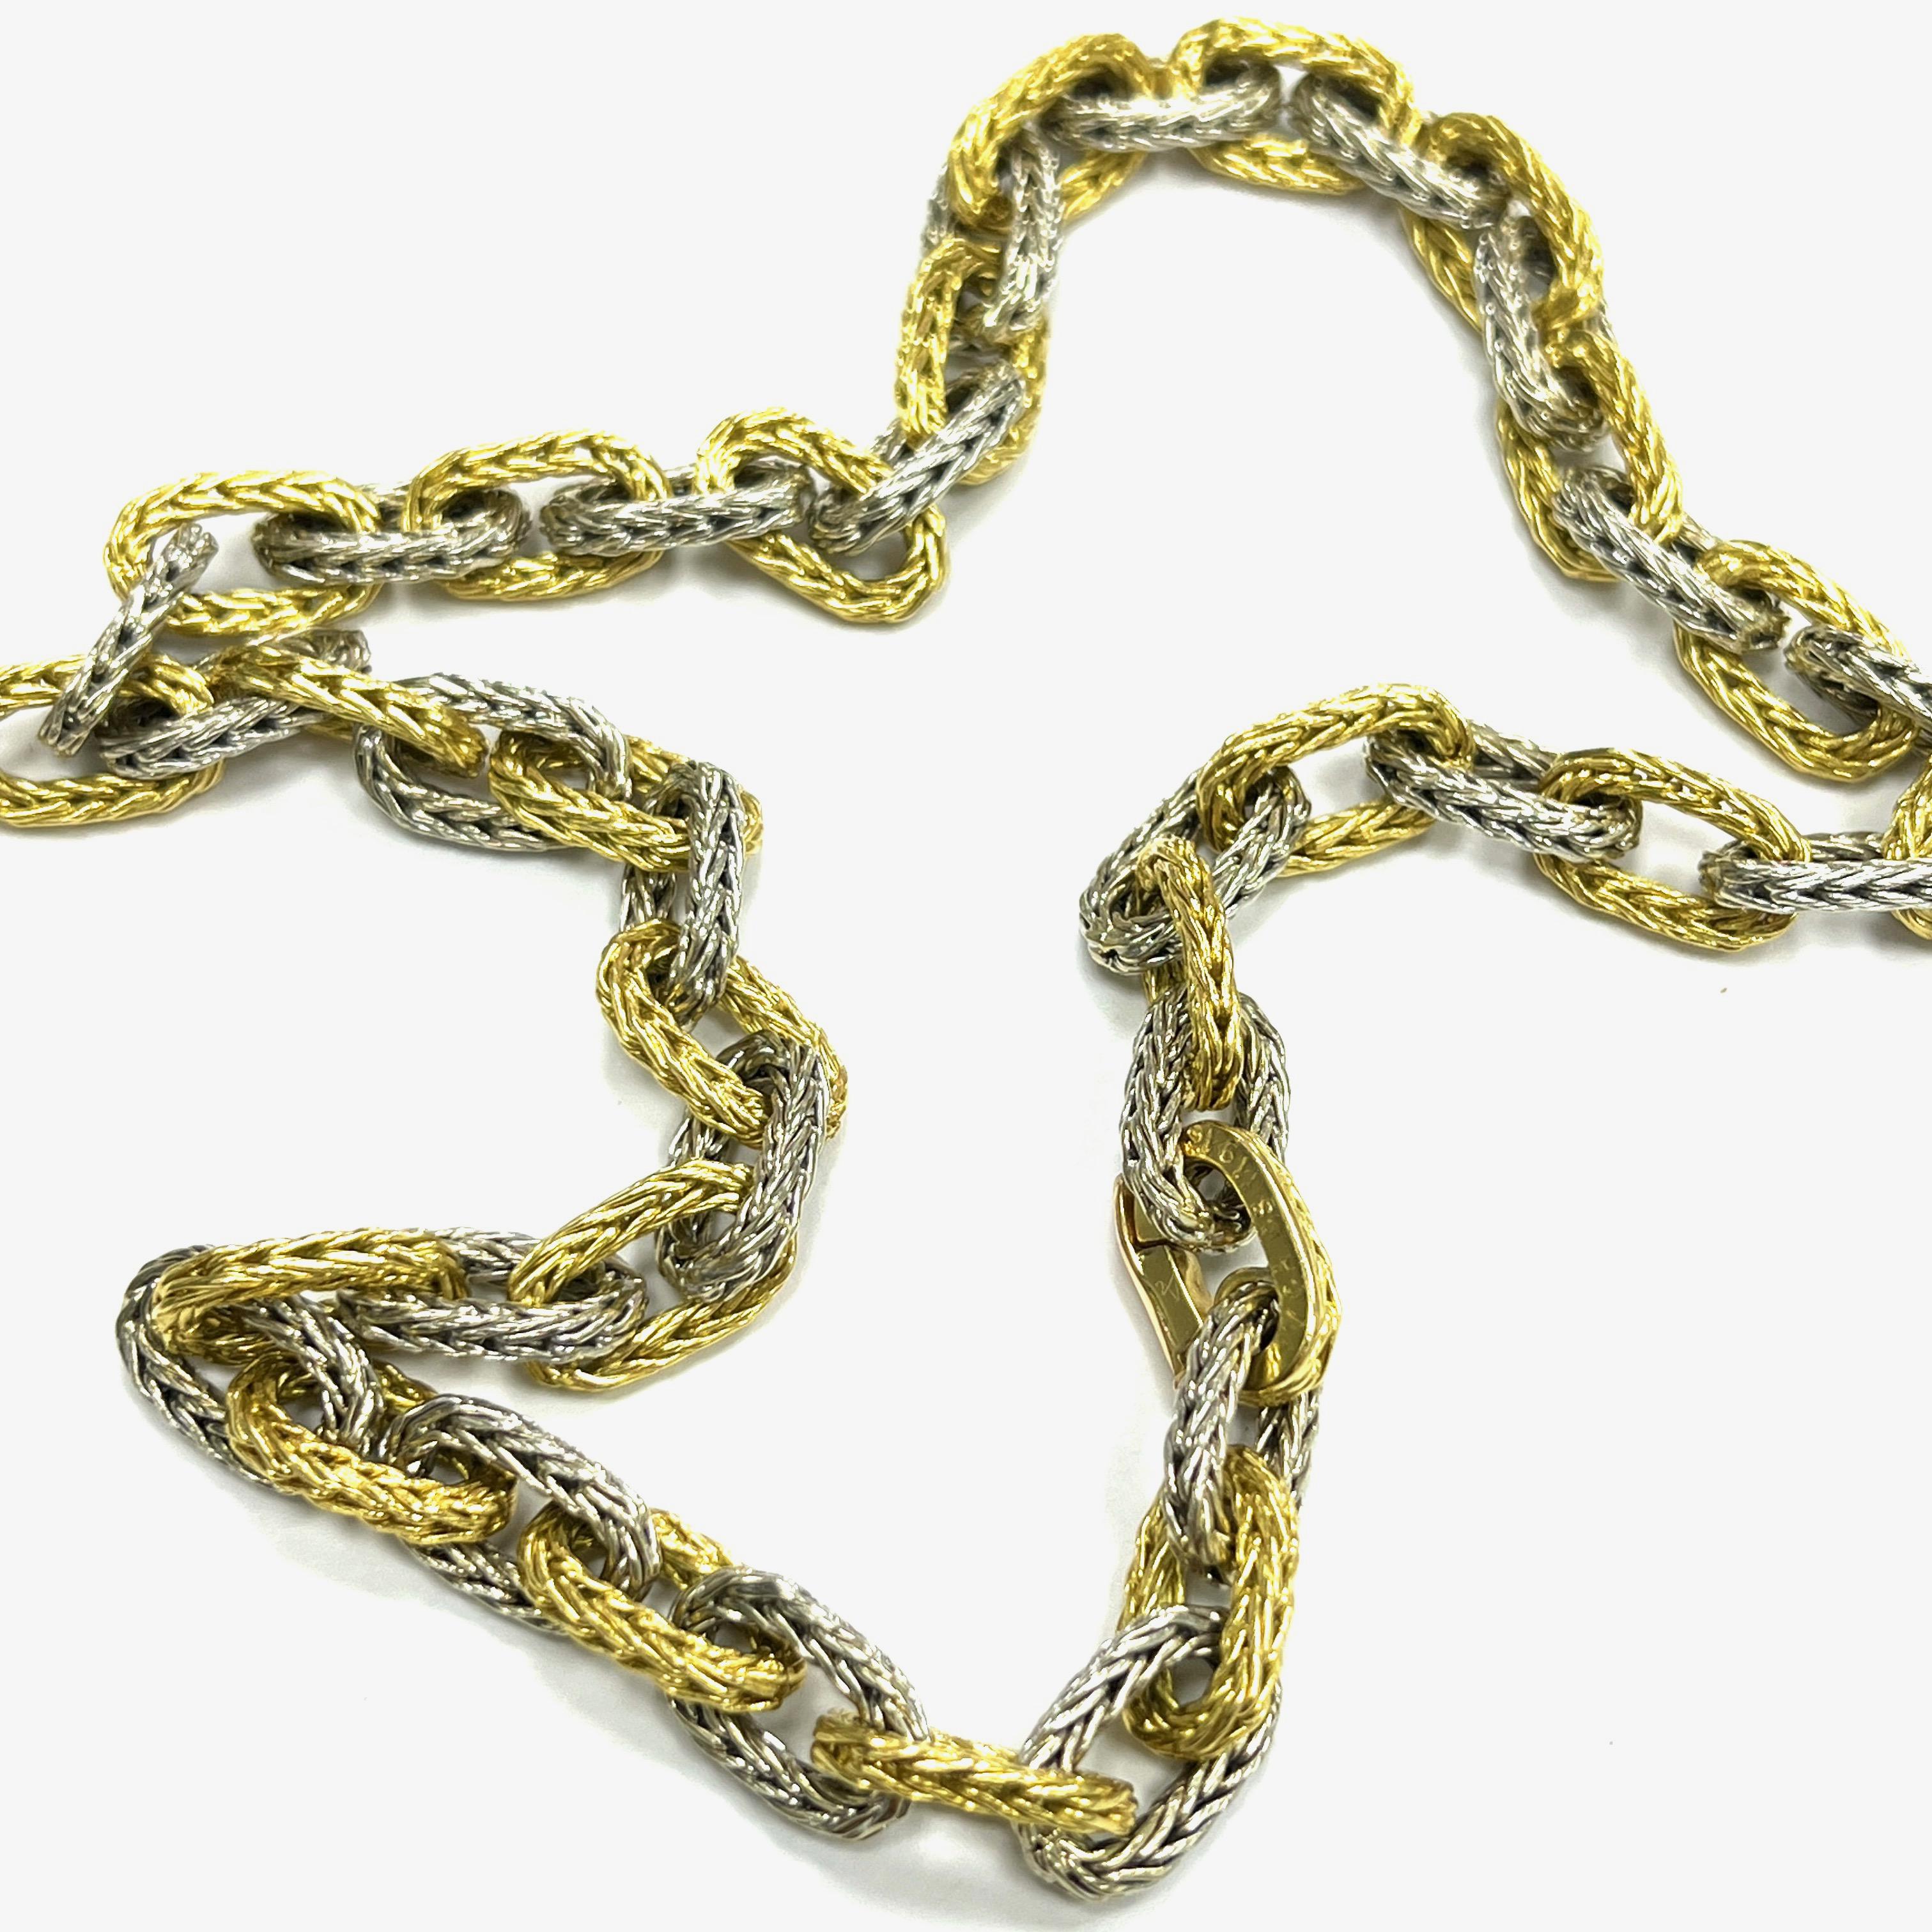 Van Cleef & Arpels two-tone gold chain collar necklace

Alternating 18 karat yellow and white gold; marked VCA, CS, 11916

Size: length 16.75 inches
Total weight: 61.1 grams